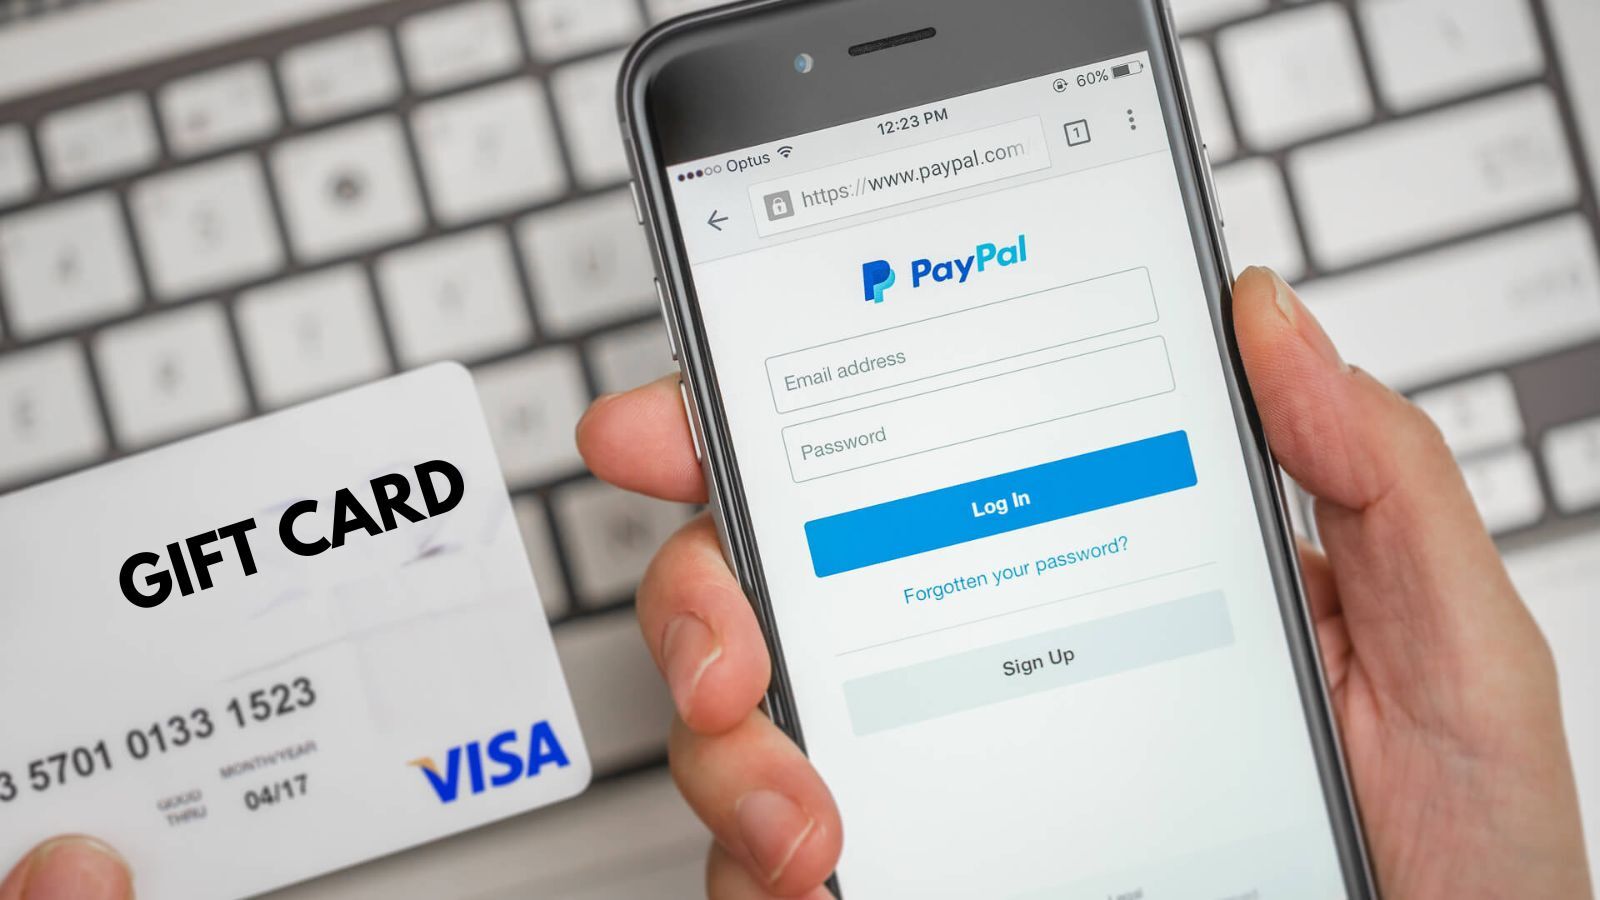 Visa Gift Card to PayPal: Add, Transfer and More